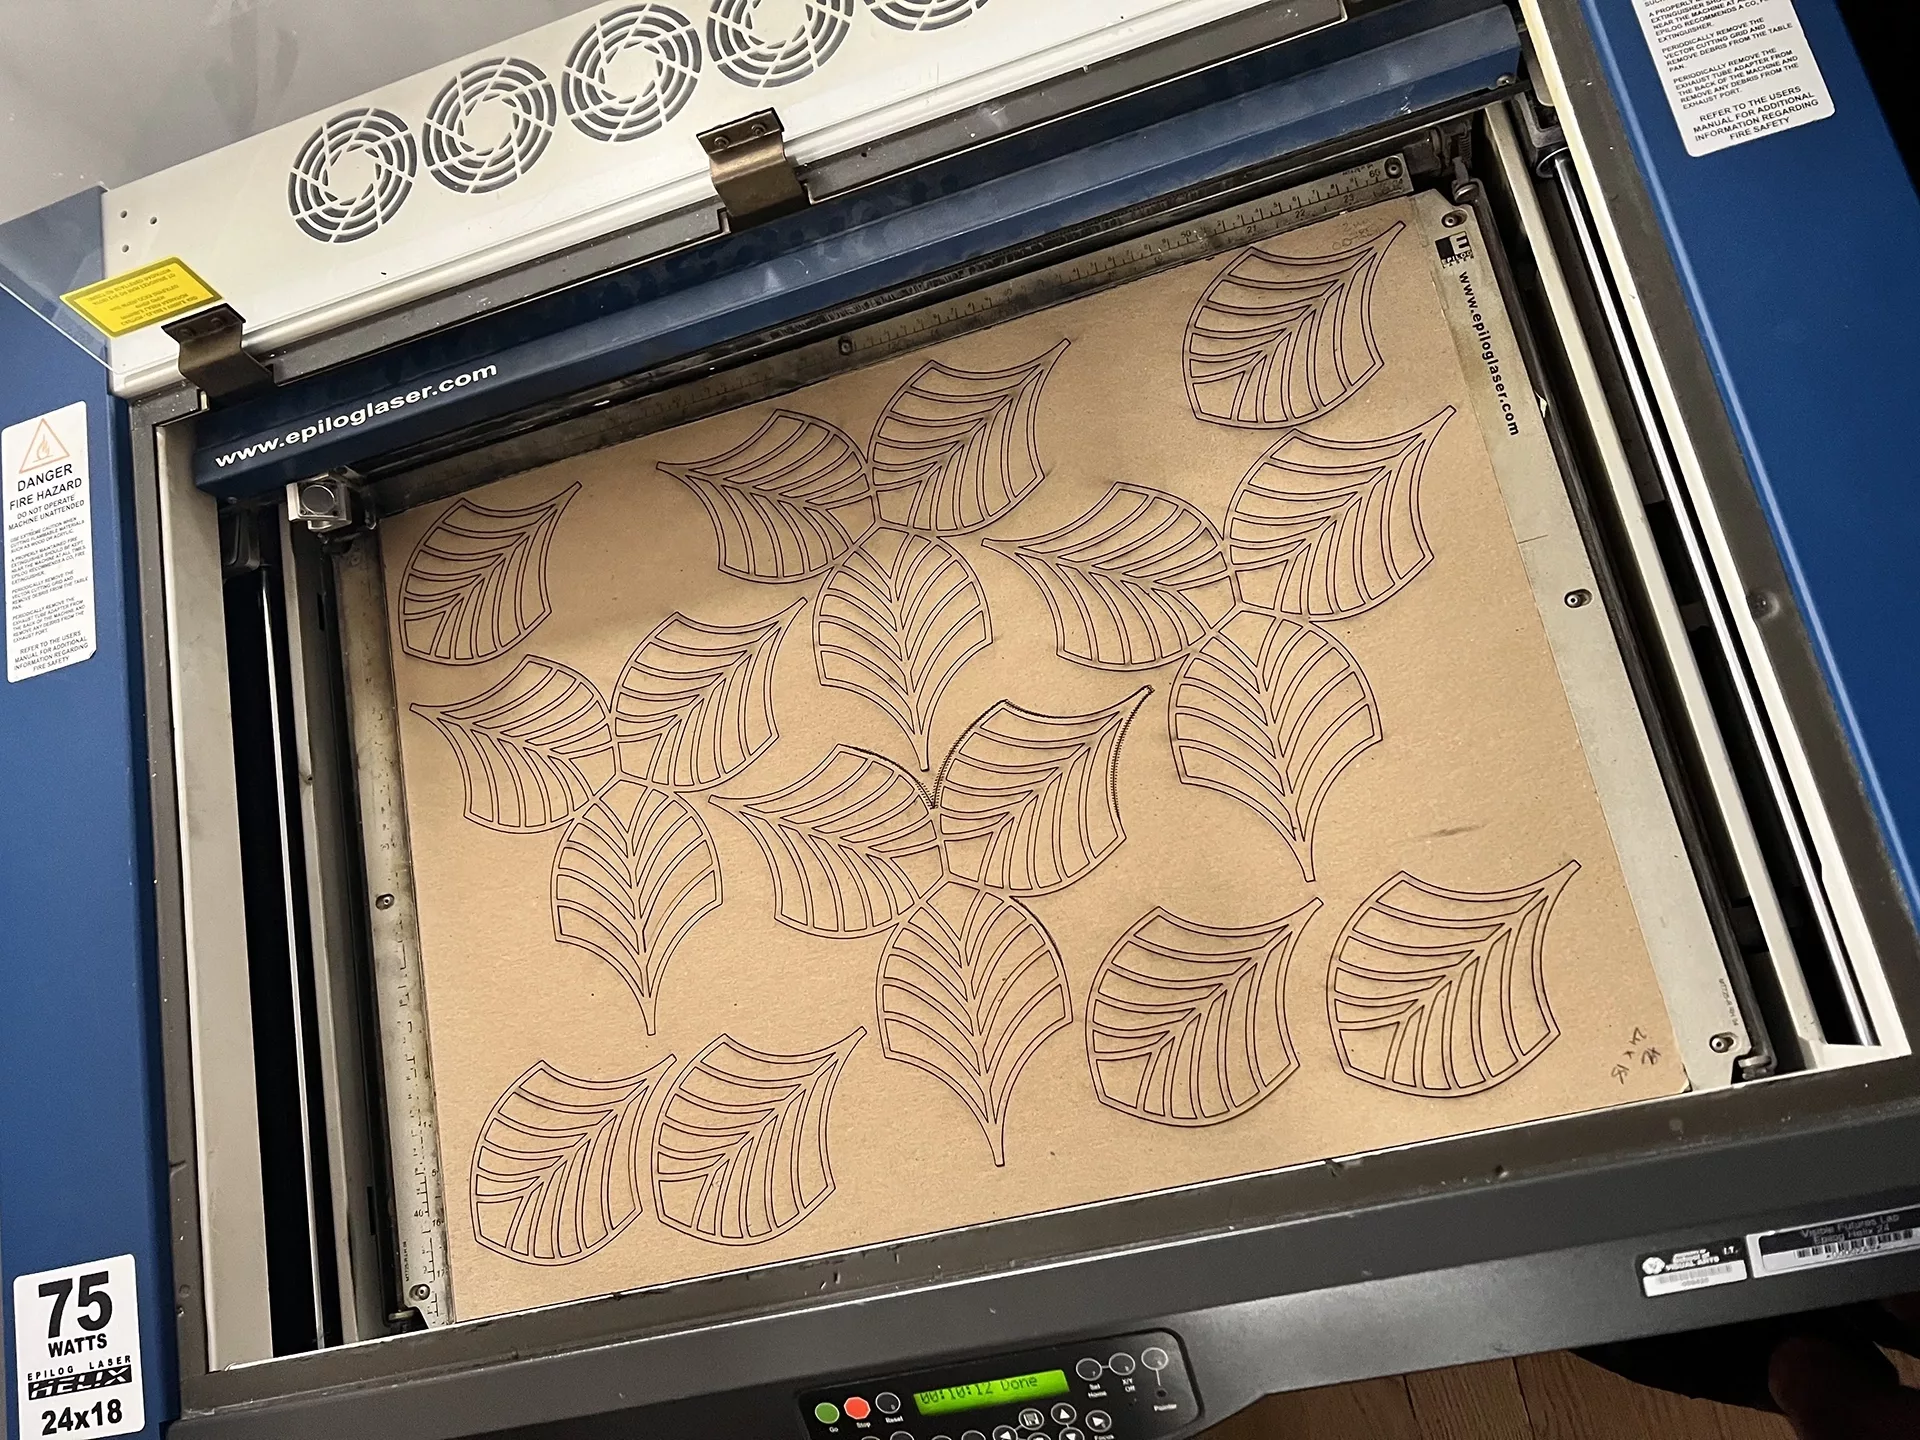 The MDF leaves in the laser cutter.